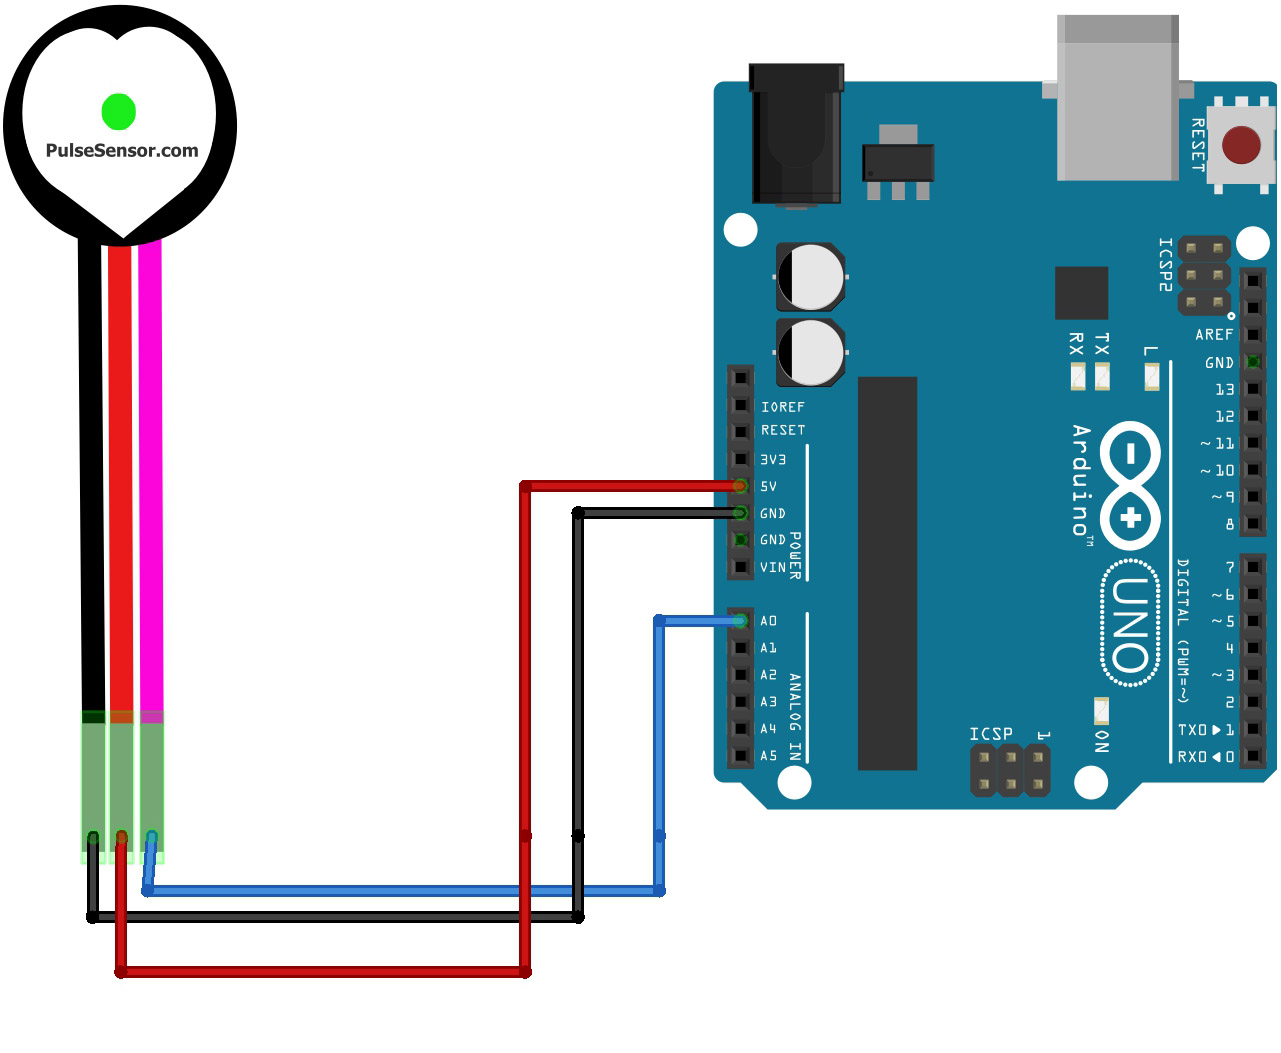 Connecting the pulse sensor to the Arduino